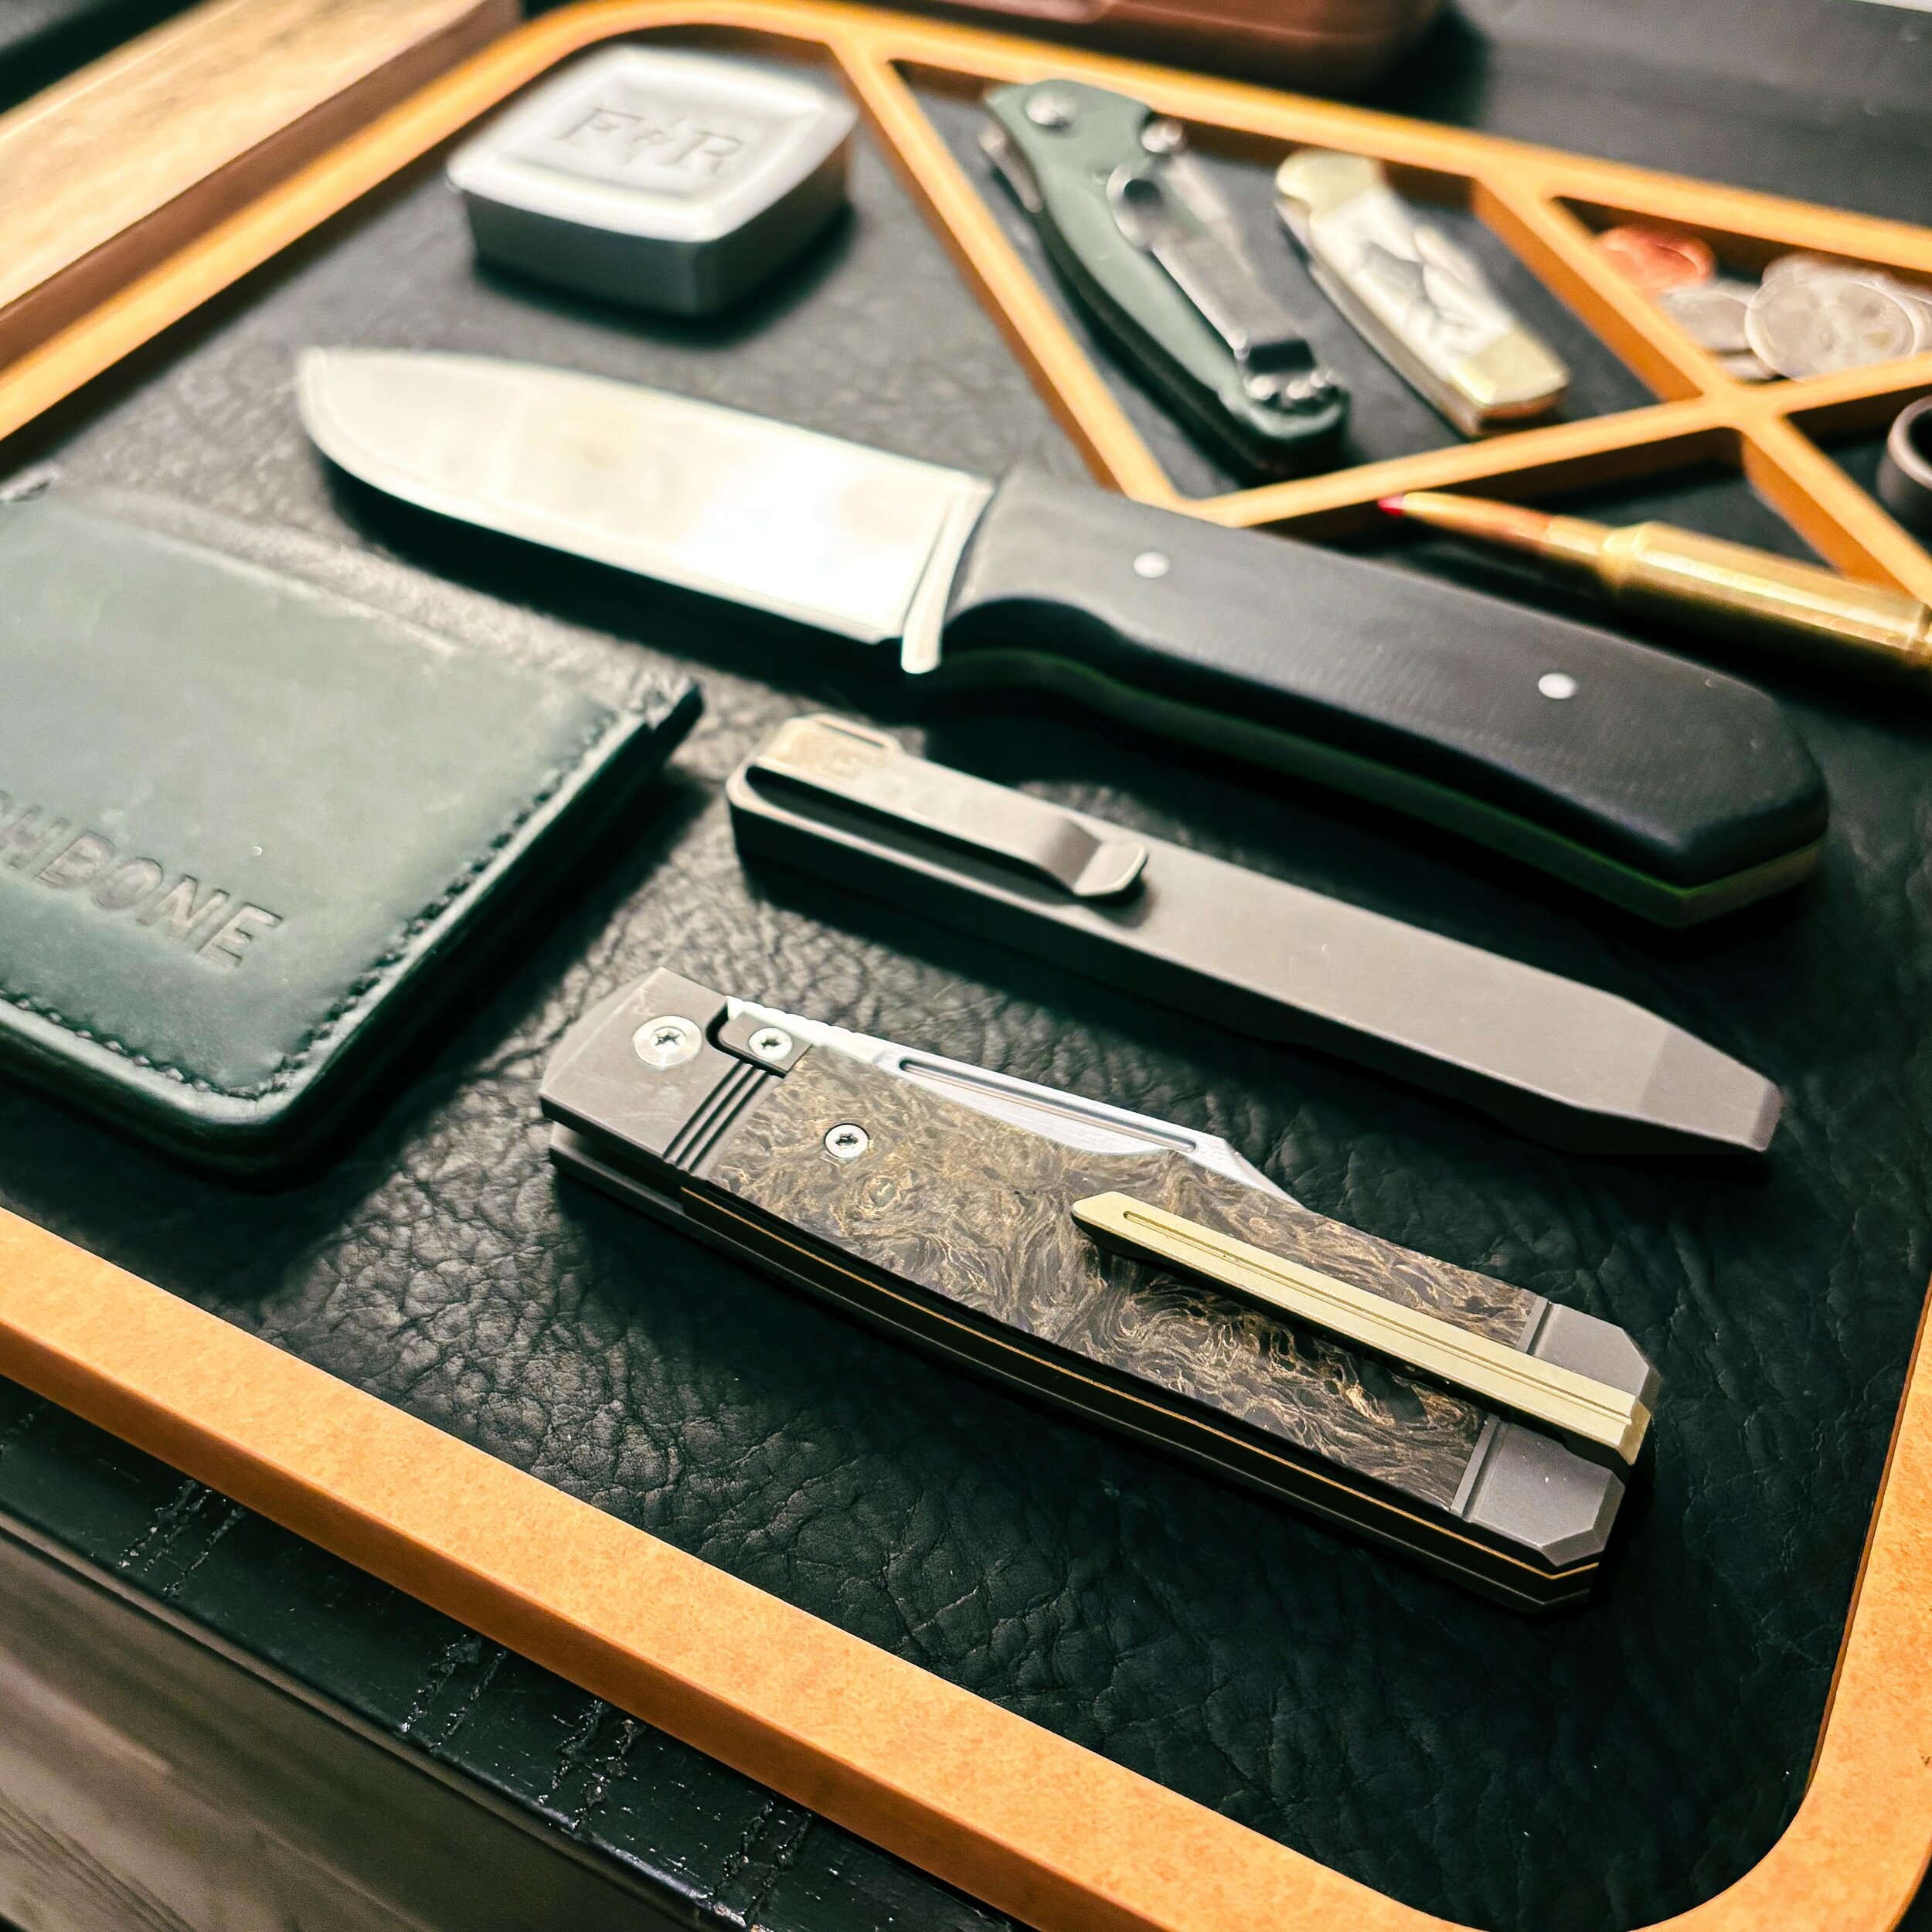 The hold out was worth it. Stoked to finally have this stunner in the rotation. #edc #edcgear #edccommunity #valettray #mensvalet #leathervalet